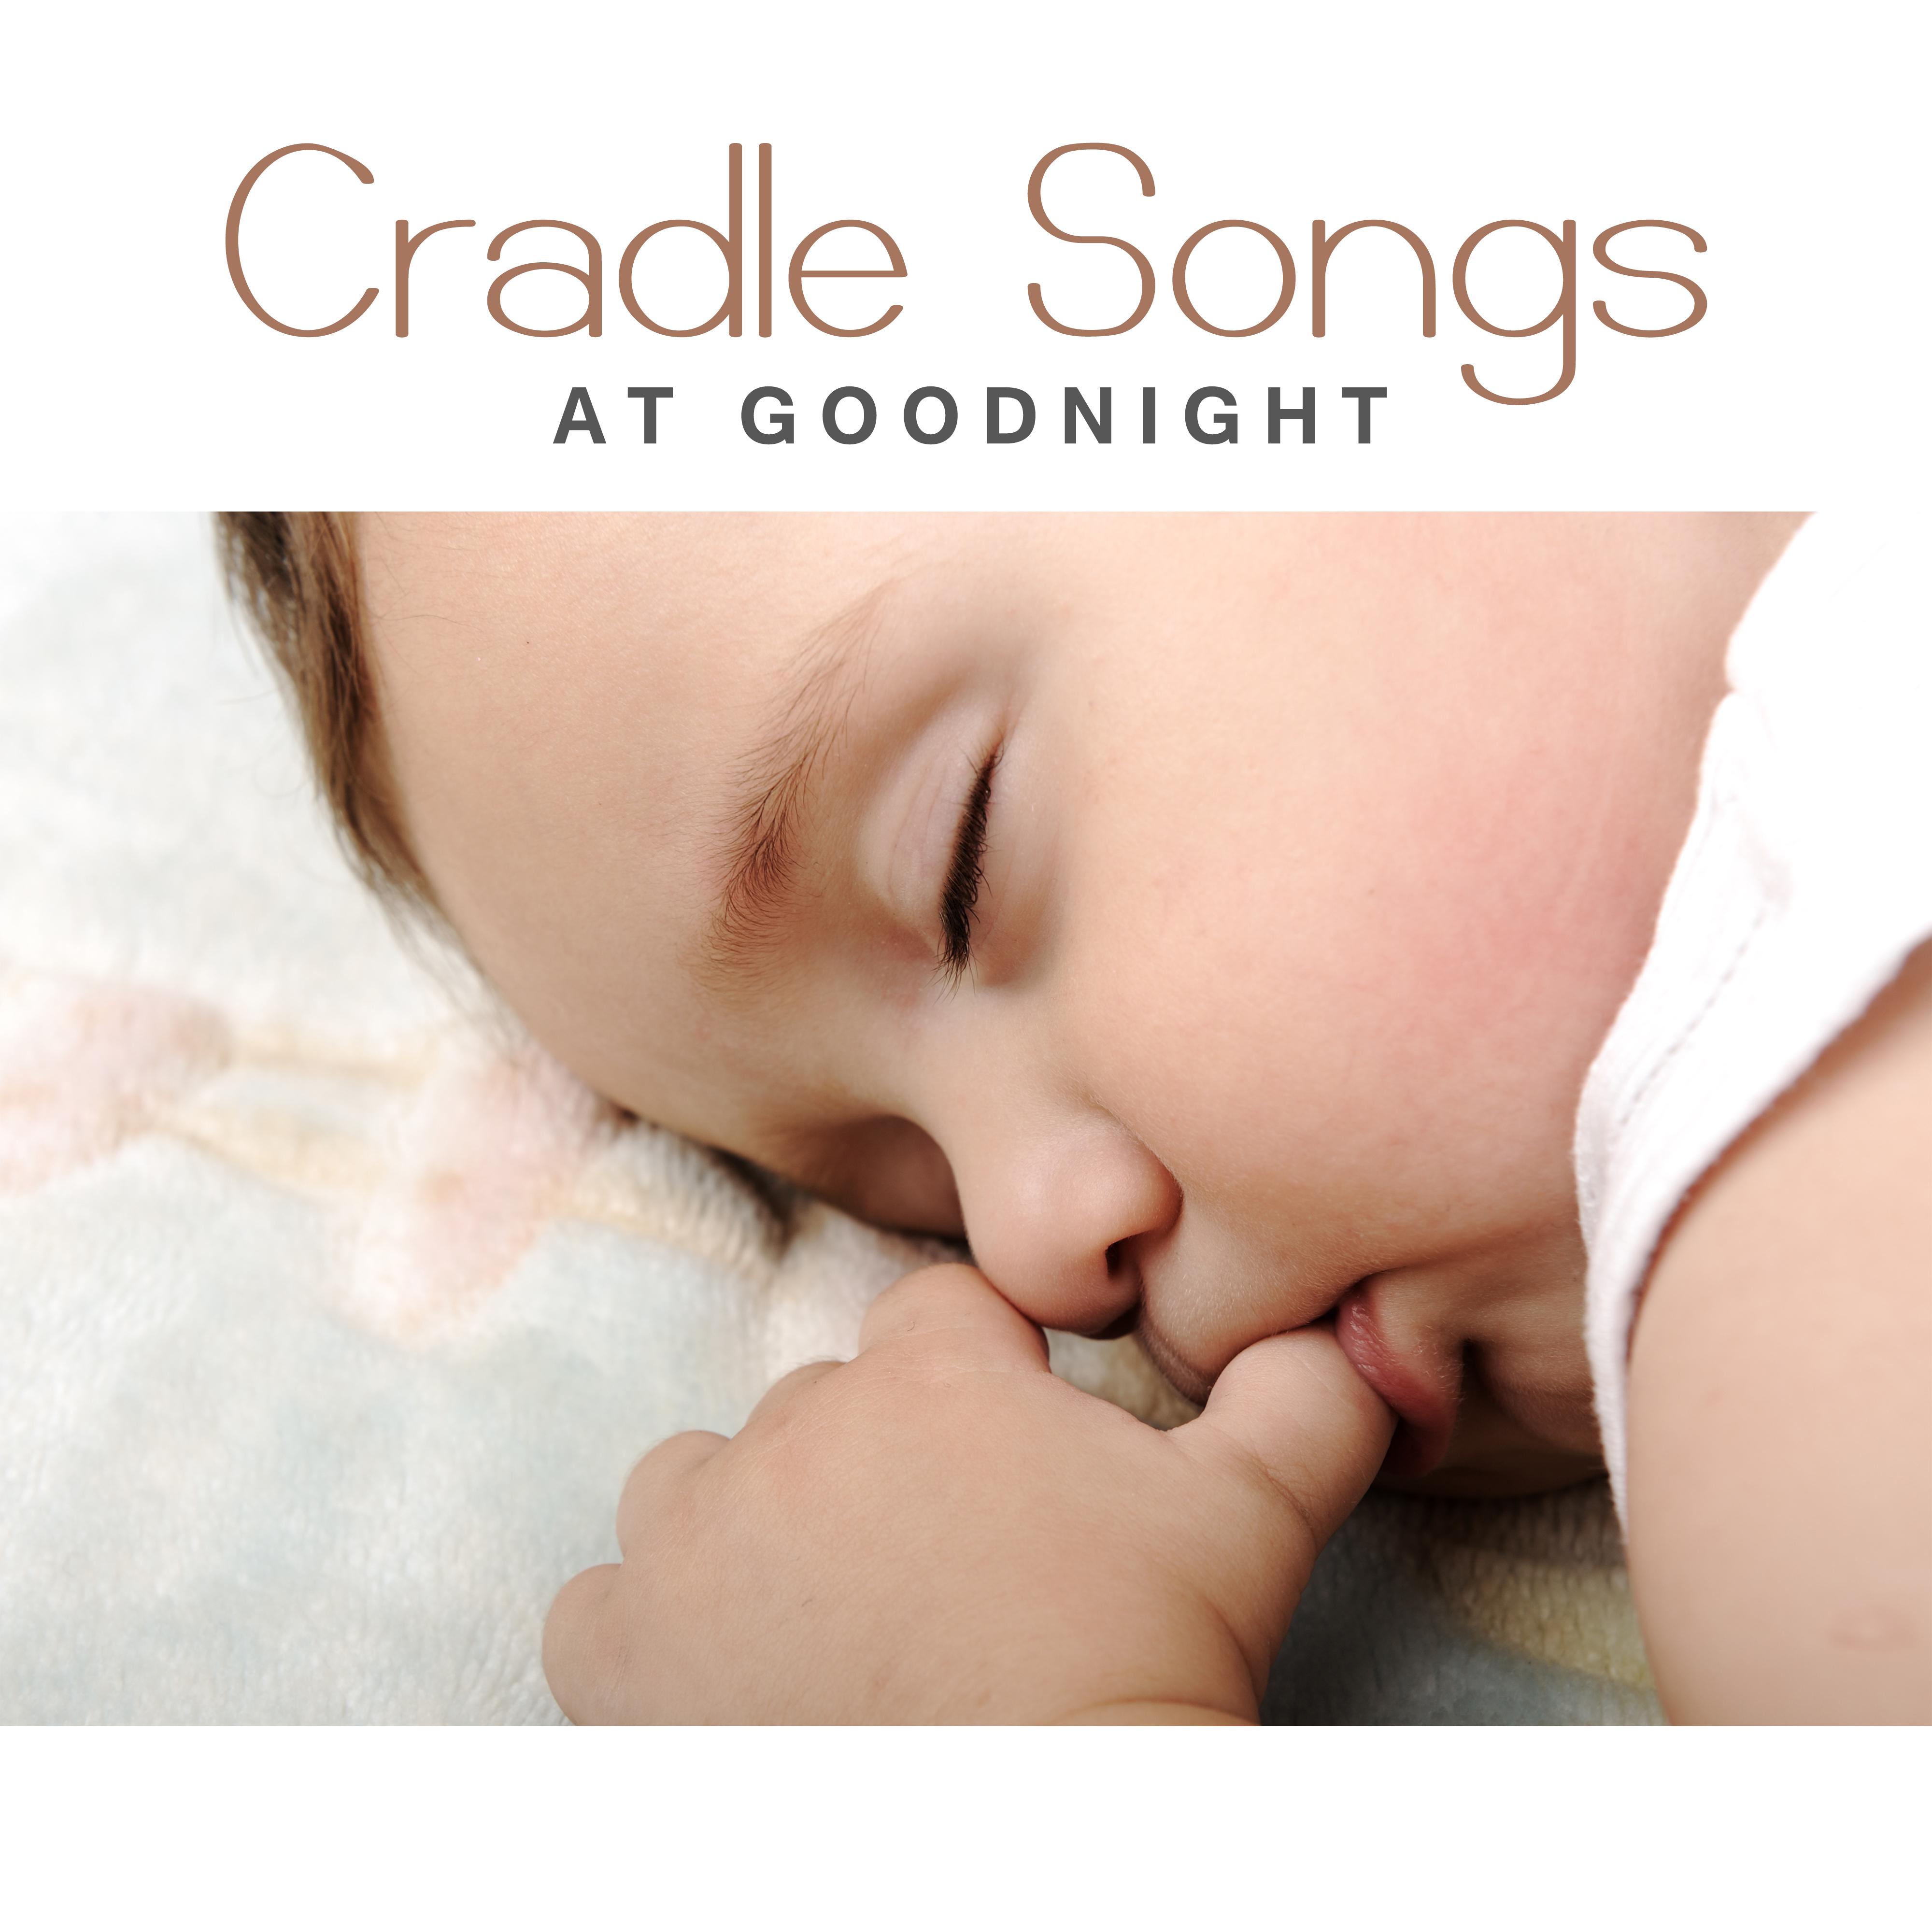 Cradle Songs at Goodnight – Sweet Dreams, Baby Naptime, Lullaby, Healing Music for Baby, Restful Sleep, Soothing Sounds